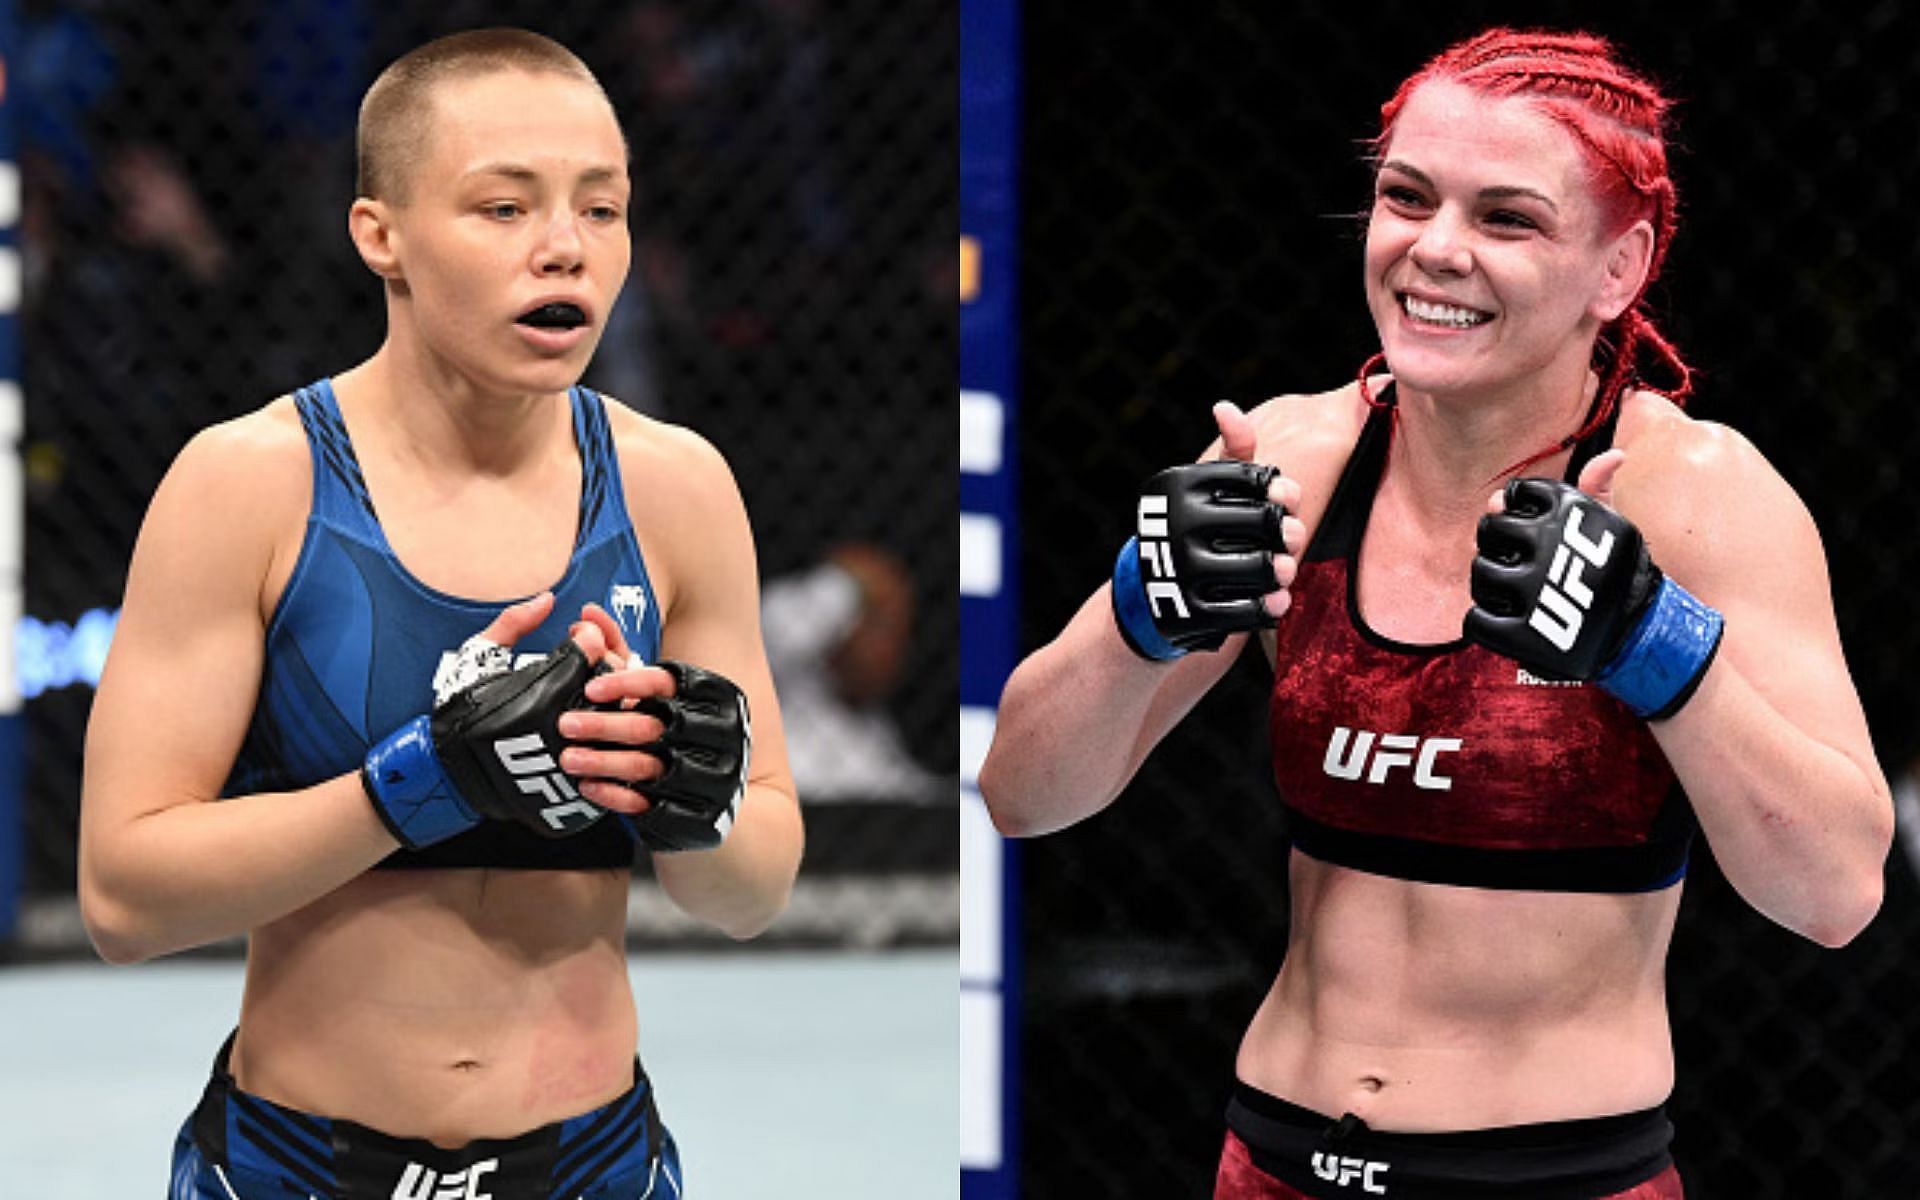 Rose Namajunas (left) and Gillian Robertson (right). [via Getty Images]